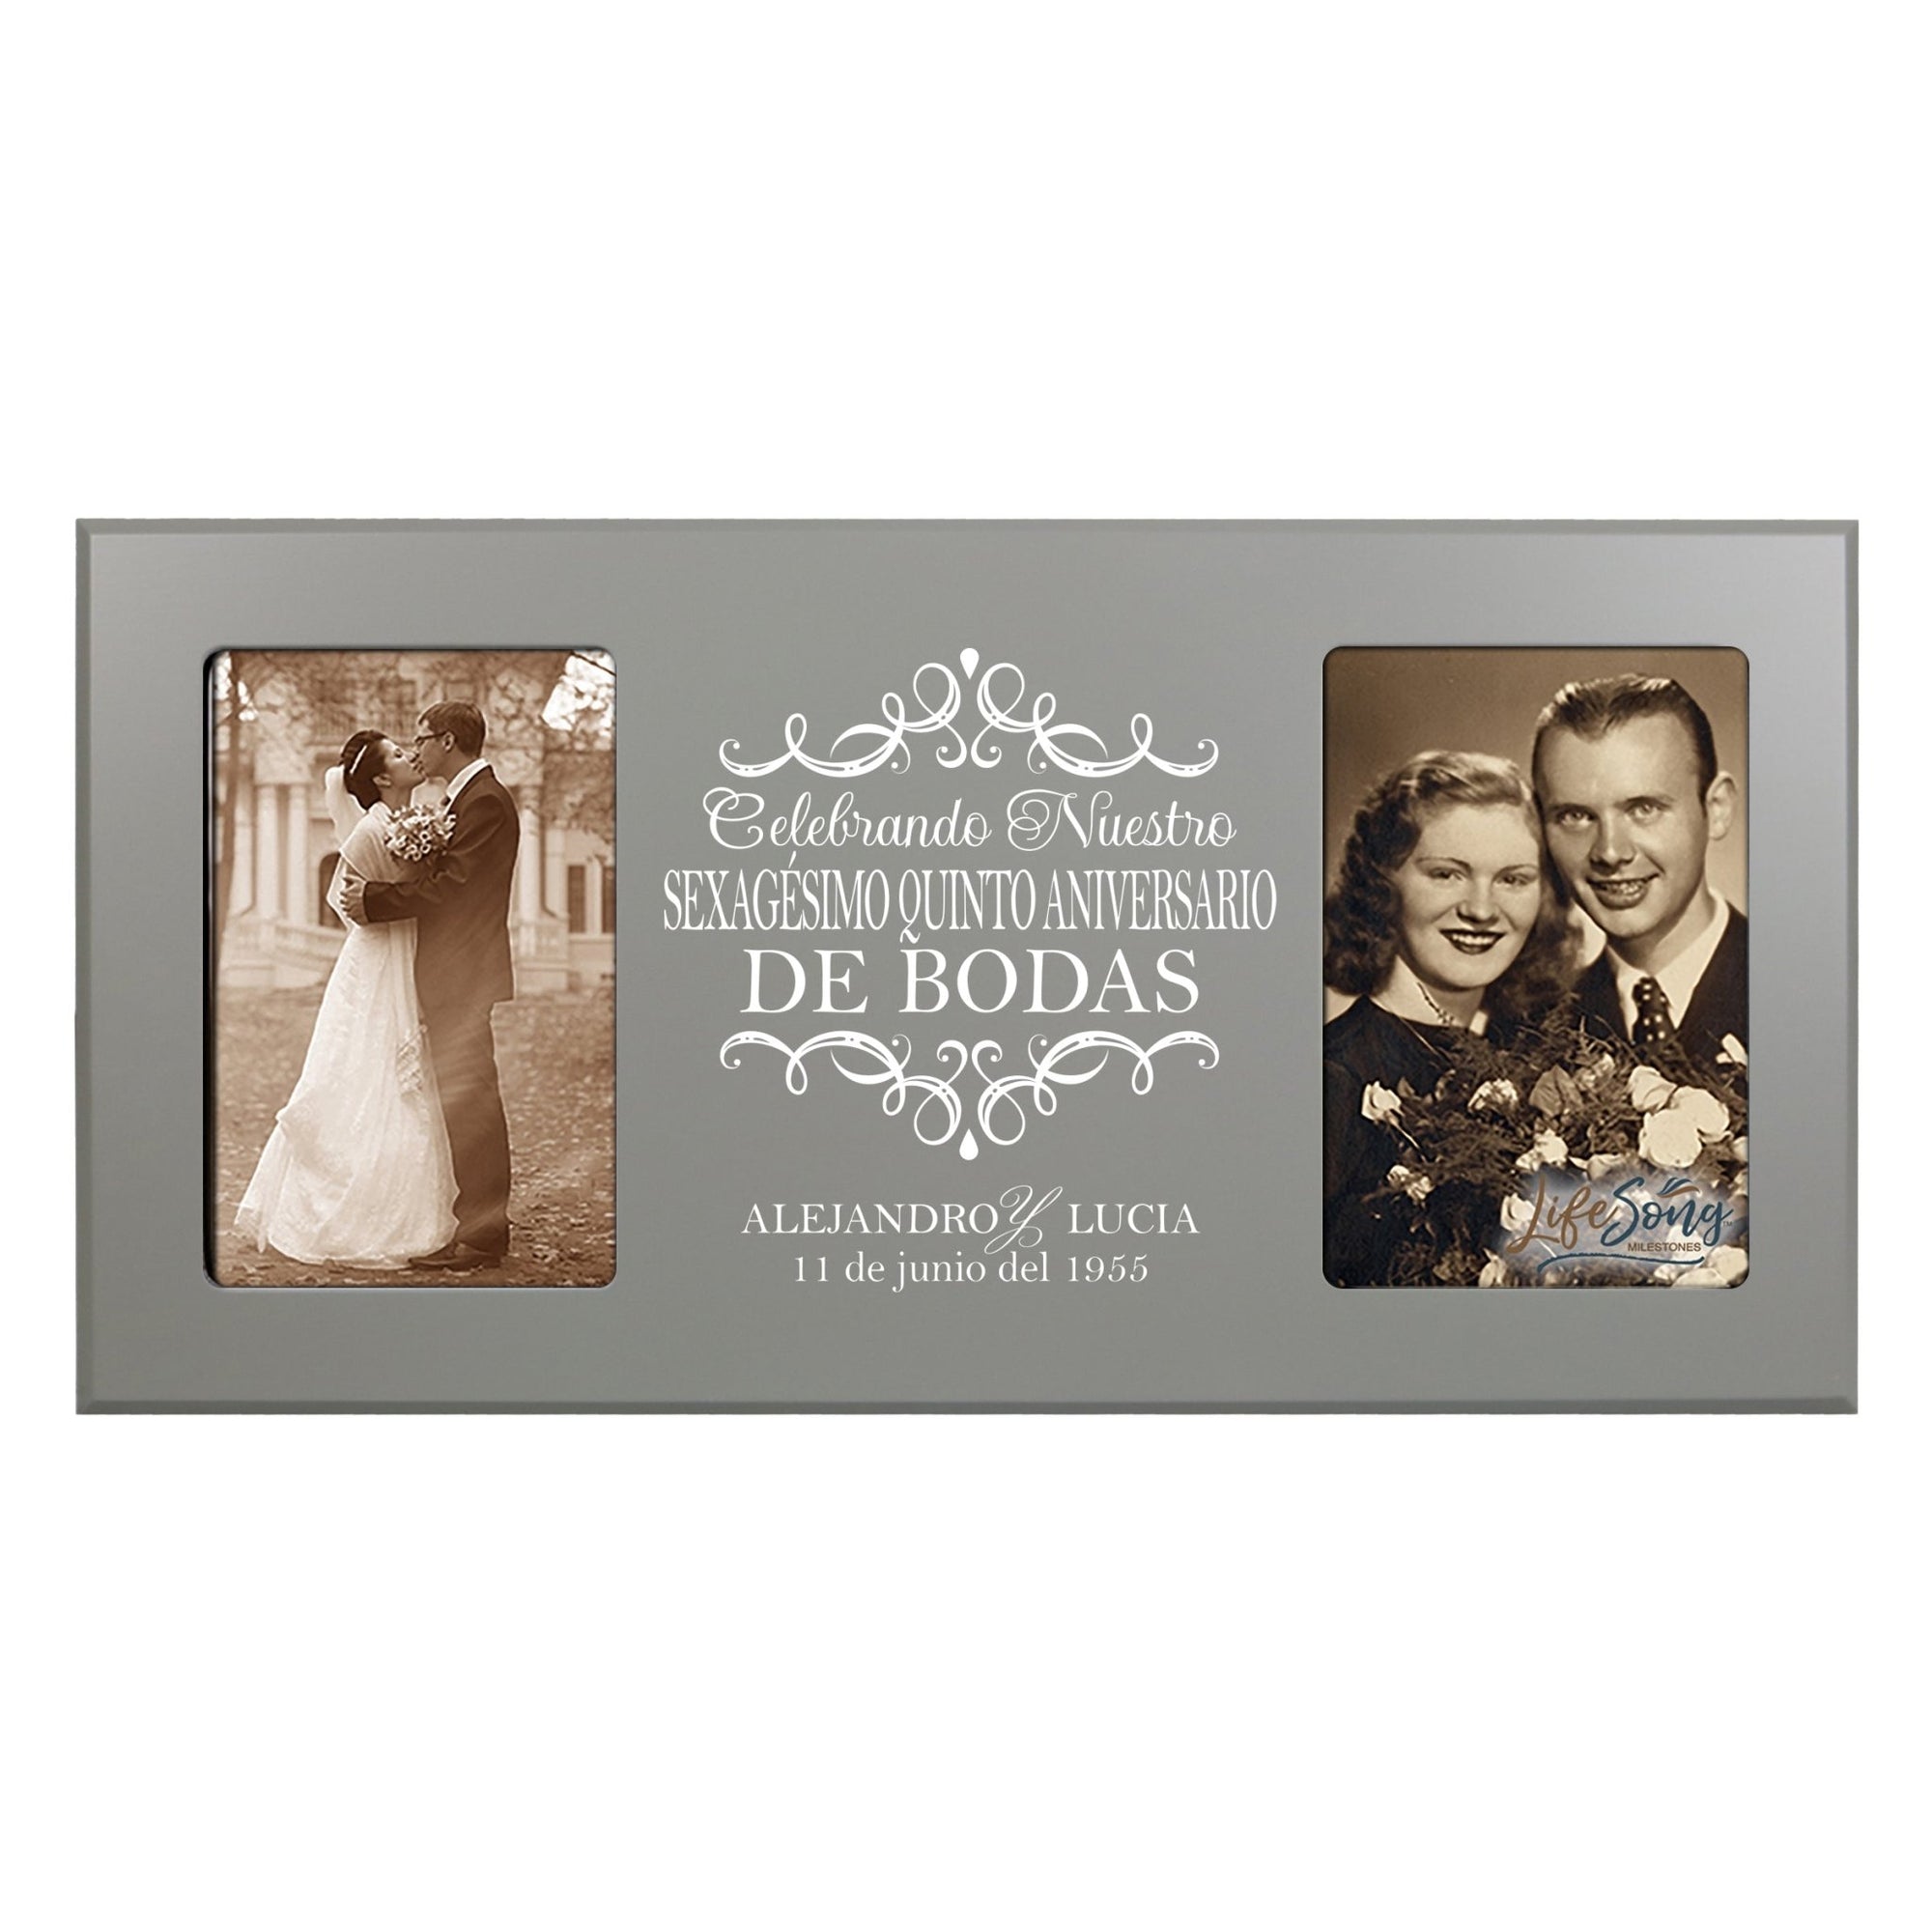 Unique Spanish Picture Frame 65th Wedding Anniversary Home Decor – Personalized Gift for Couples